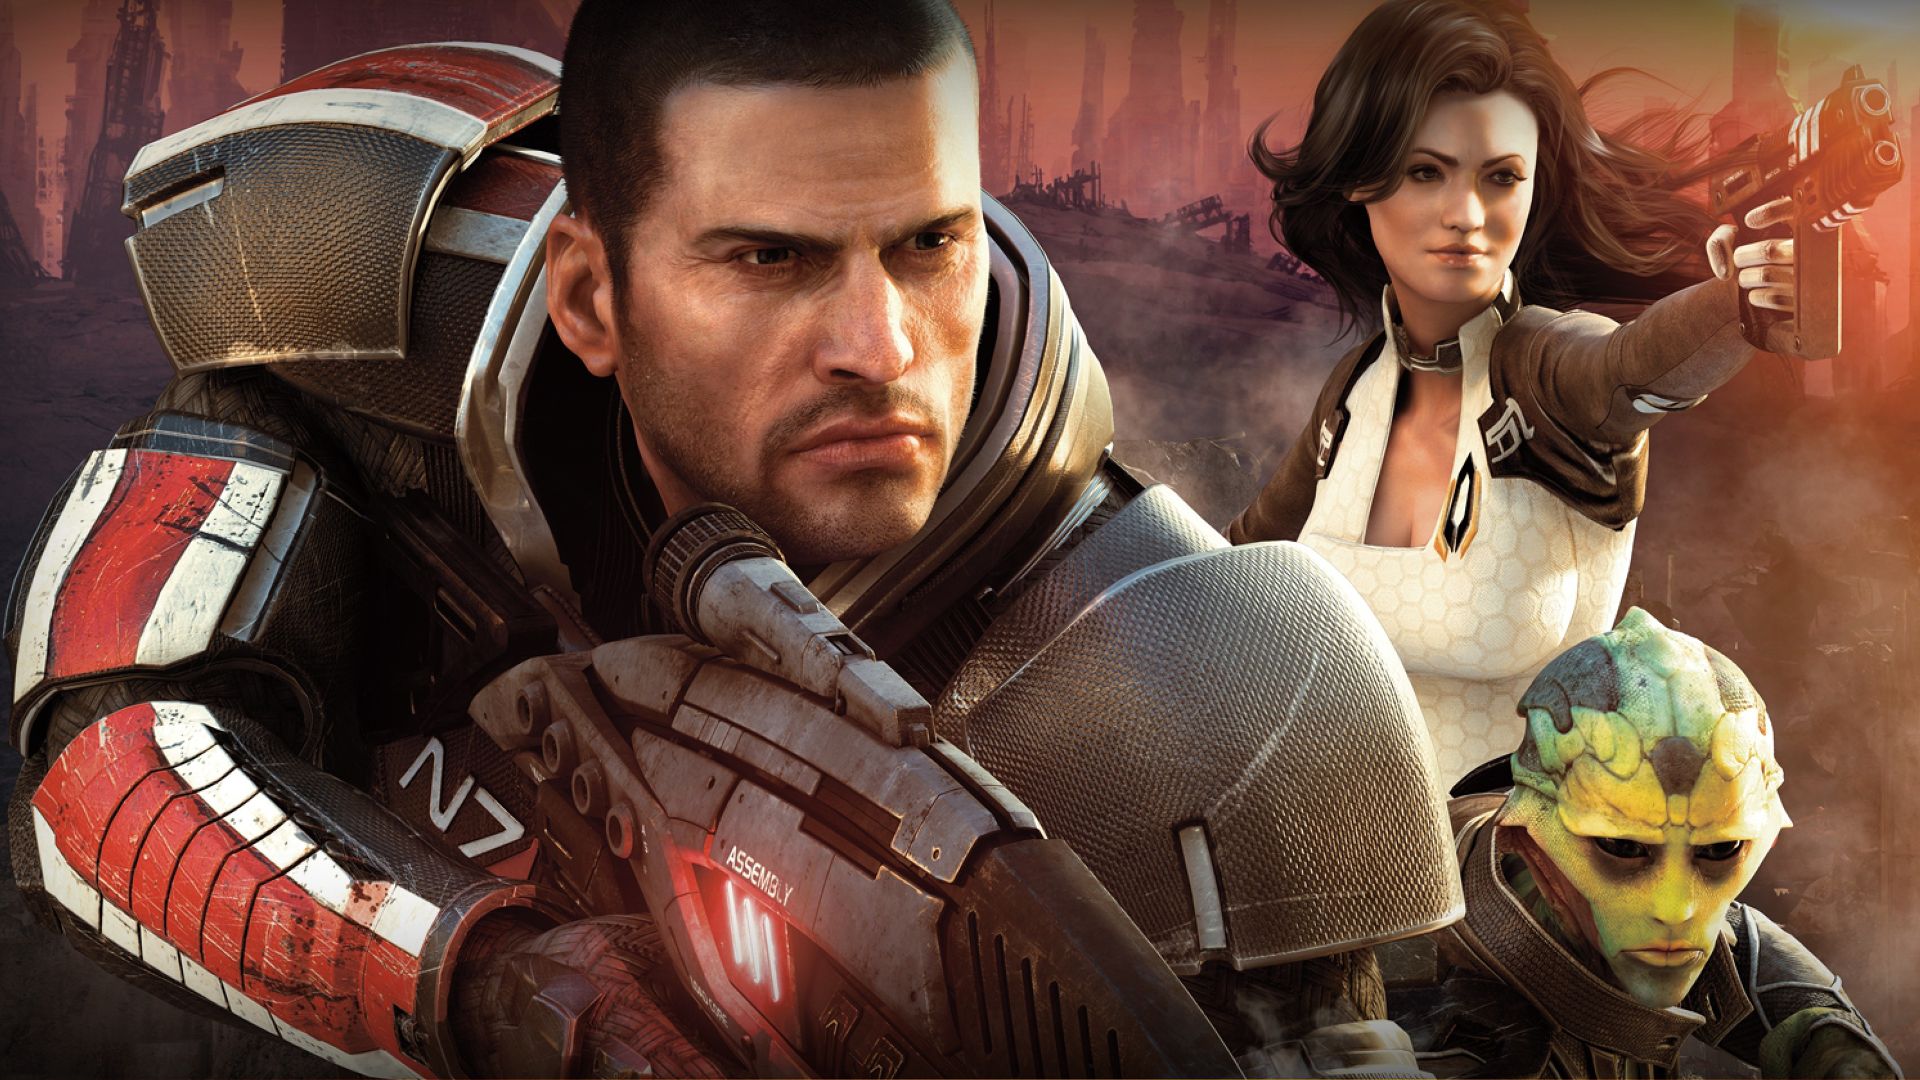 Image for Fox News controversy impacted Mass Effect 2's non-straight relationships